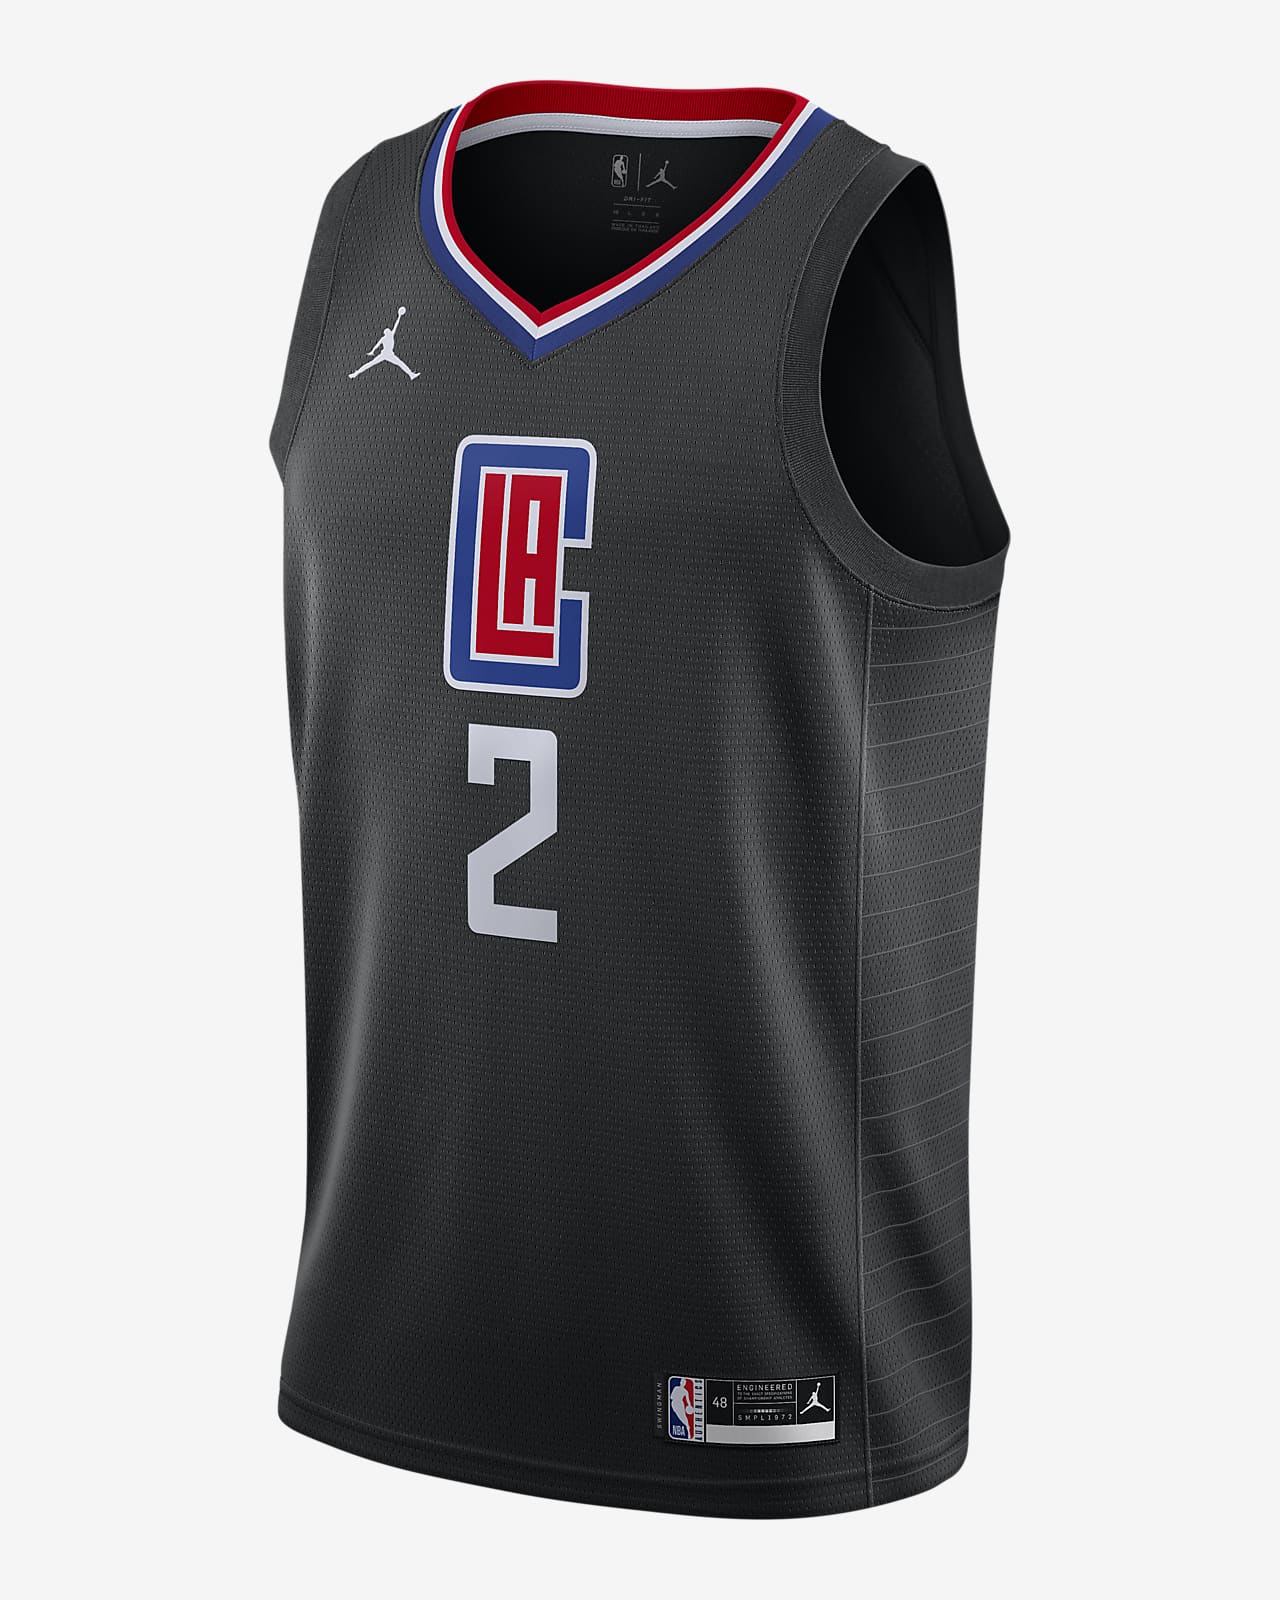 clippers jersey uk